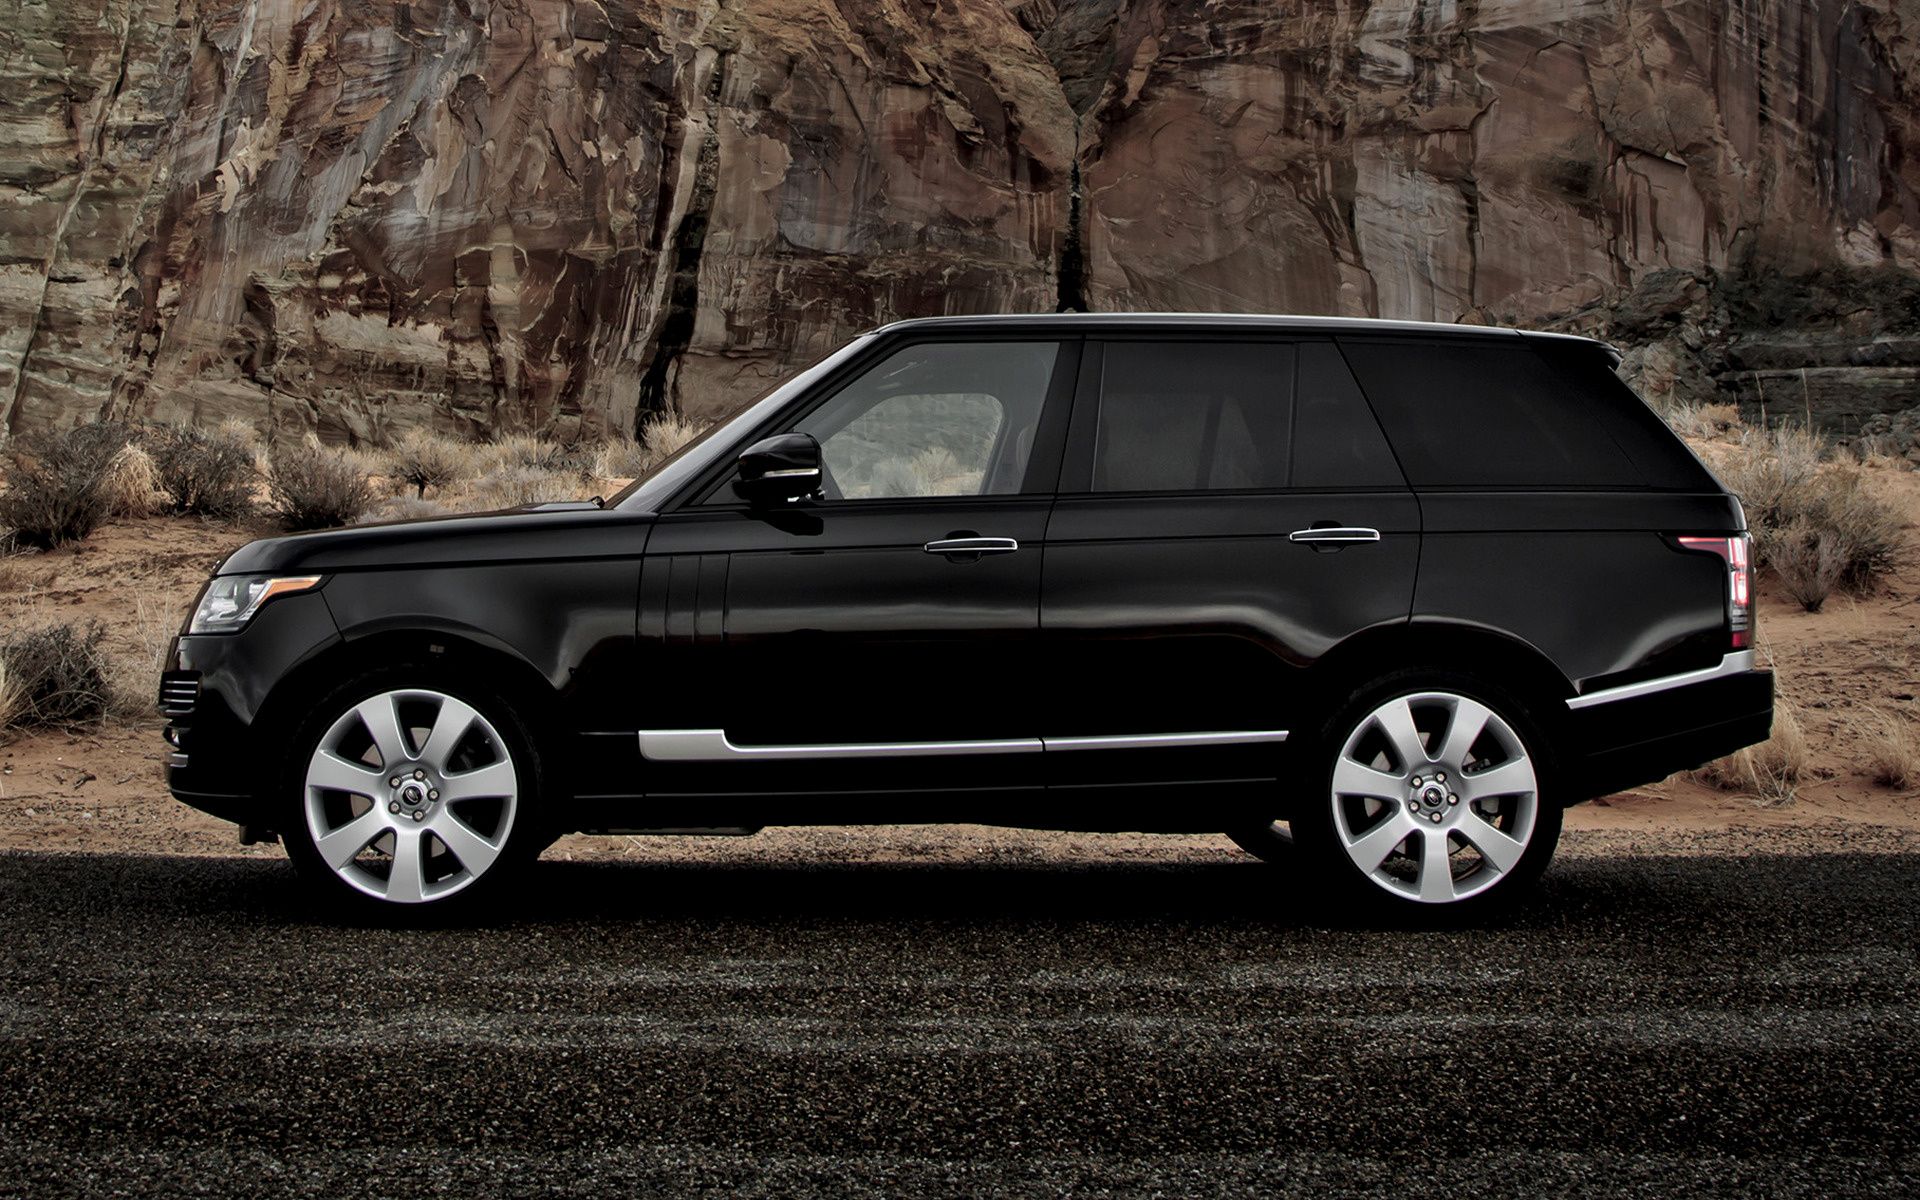 Range Rover Autobiography (US) and HD Image